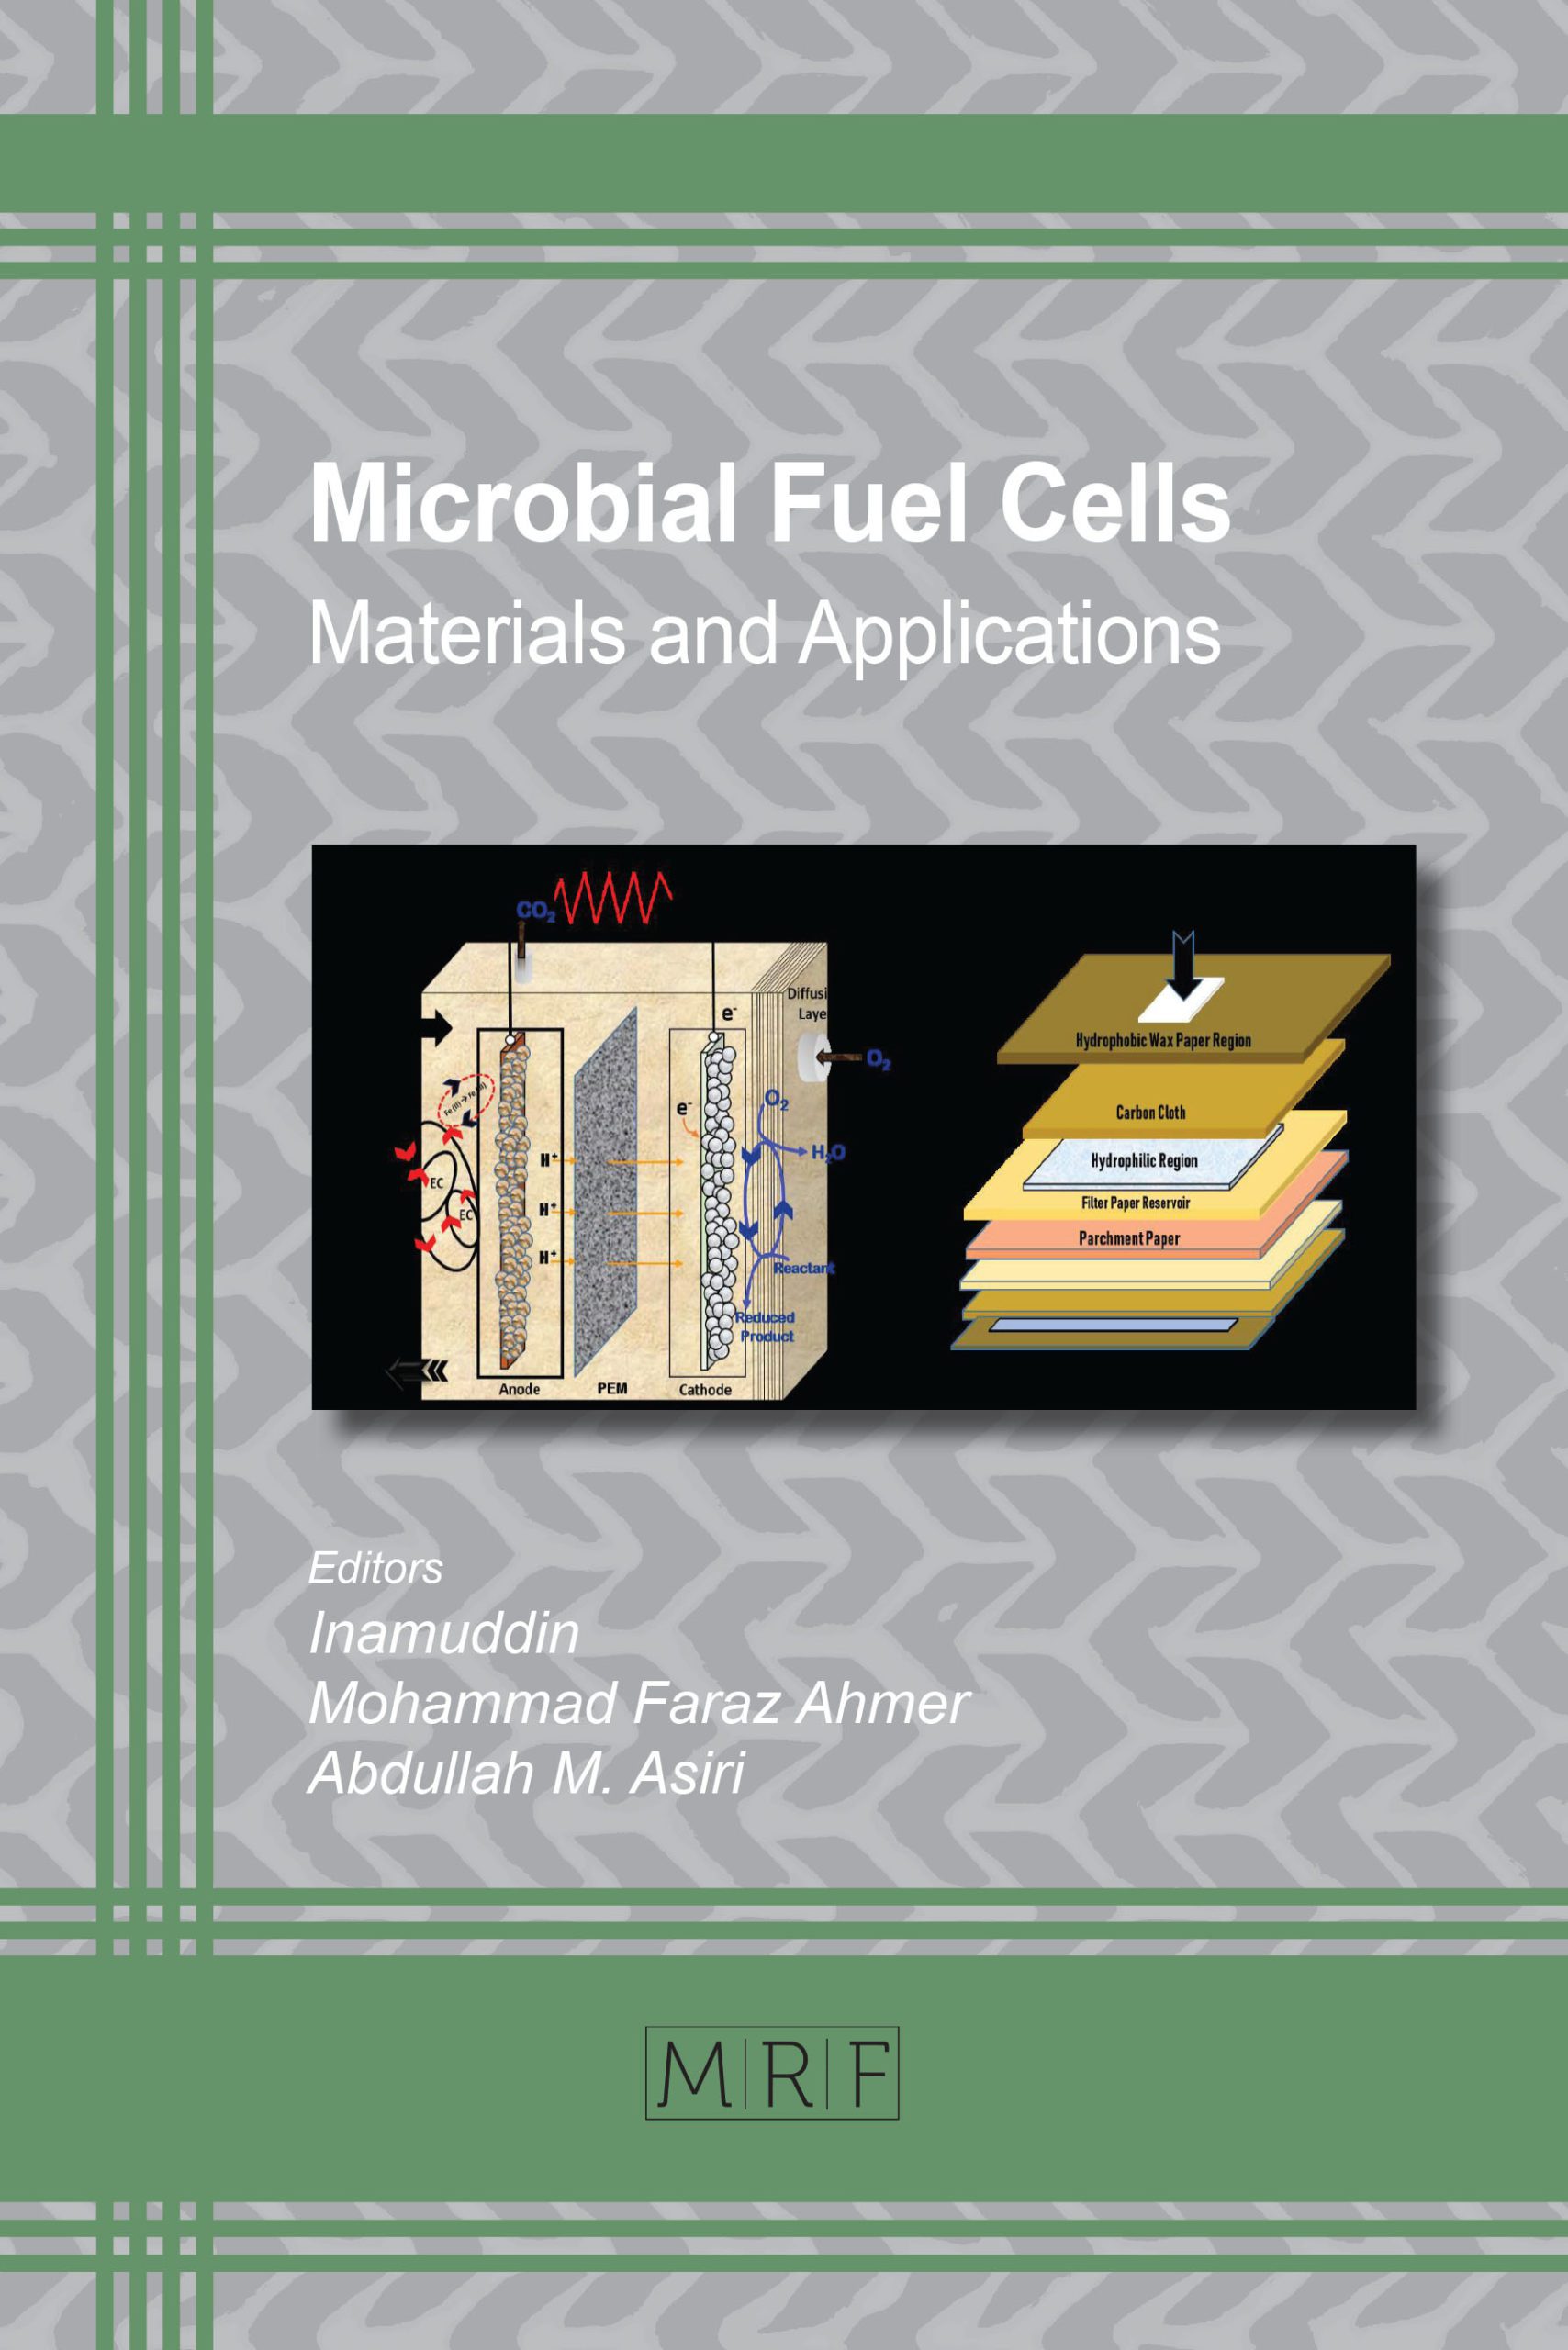 Research　Forum　Microbial　paperback　Materials　Materials　color　Fuel　Applications,　and　Cells:　print,